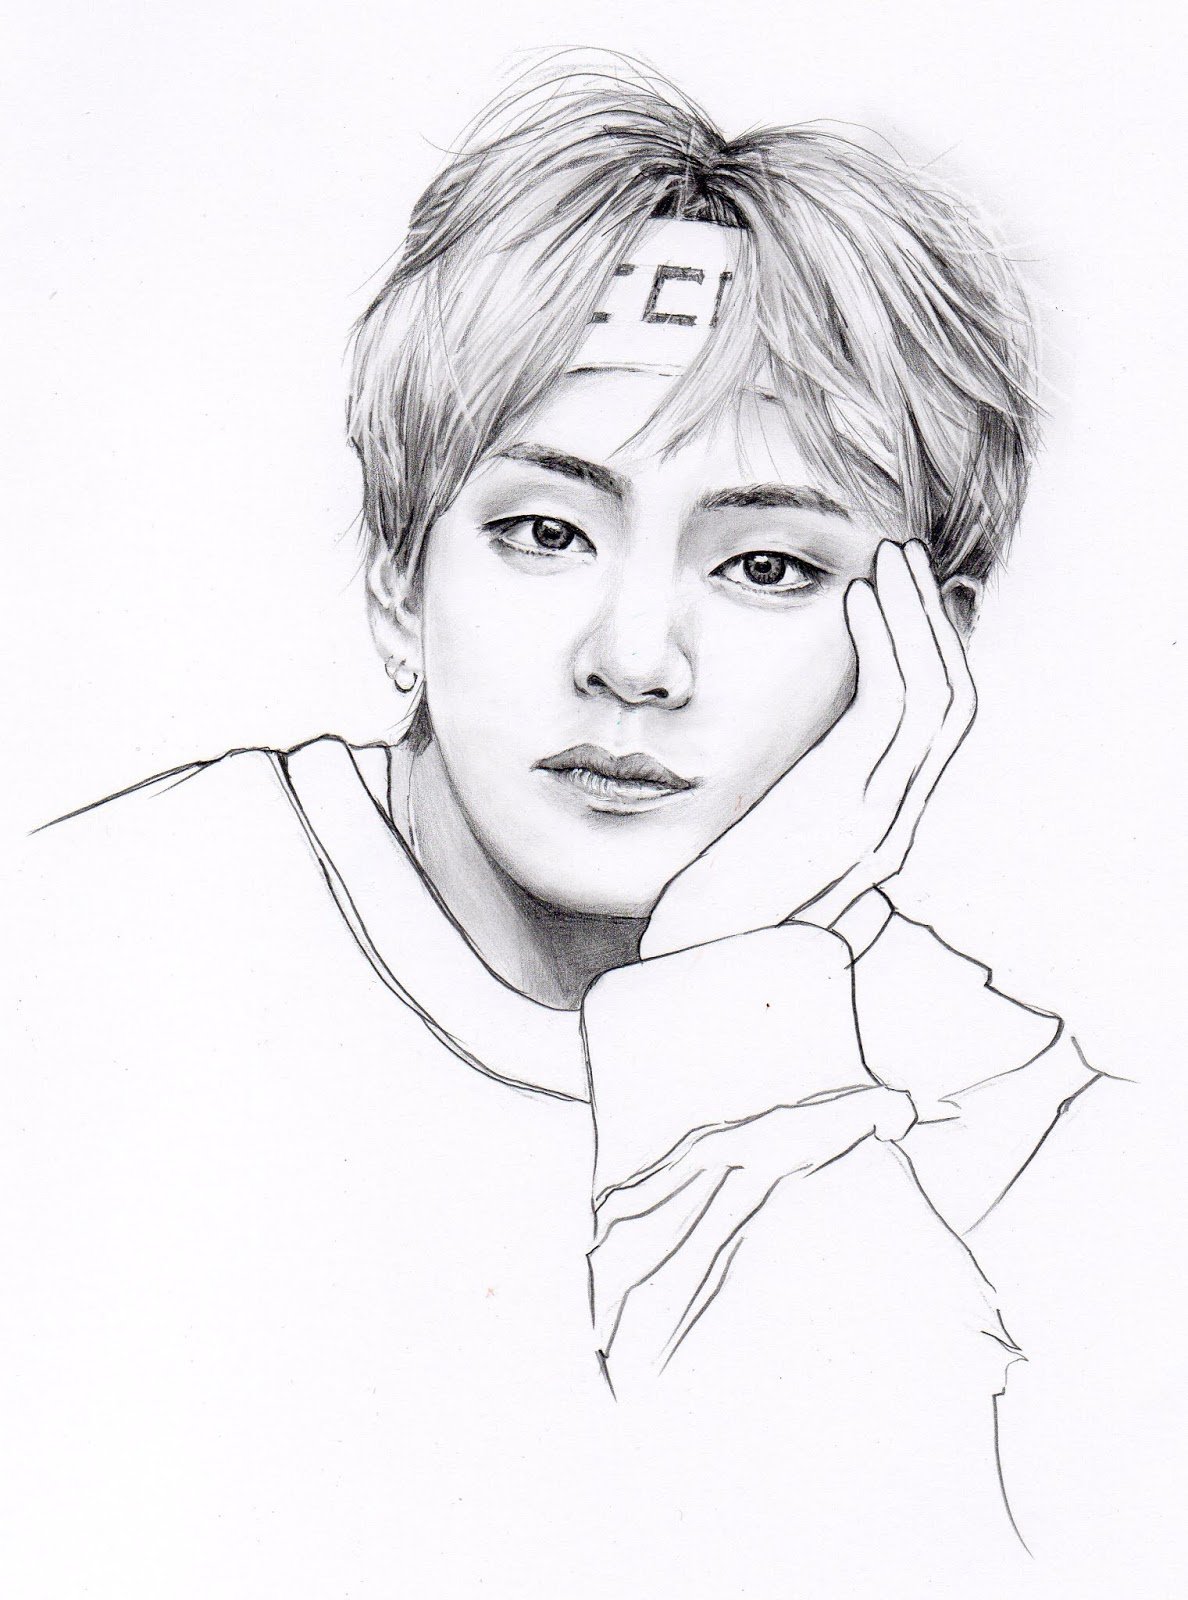 Bts V Face Sketches Kpop Drawings, Bts Drawings, Face, 47% OFF-saigonsouth.com.vn